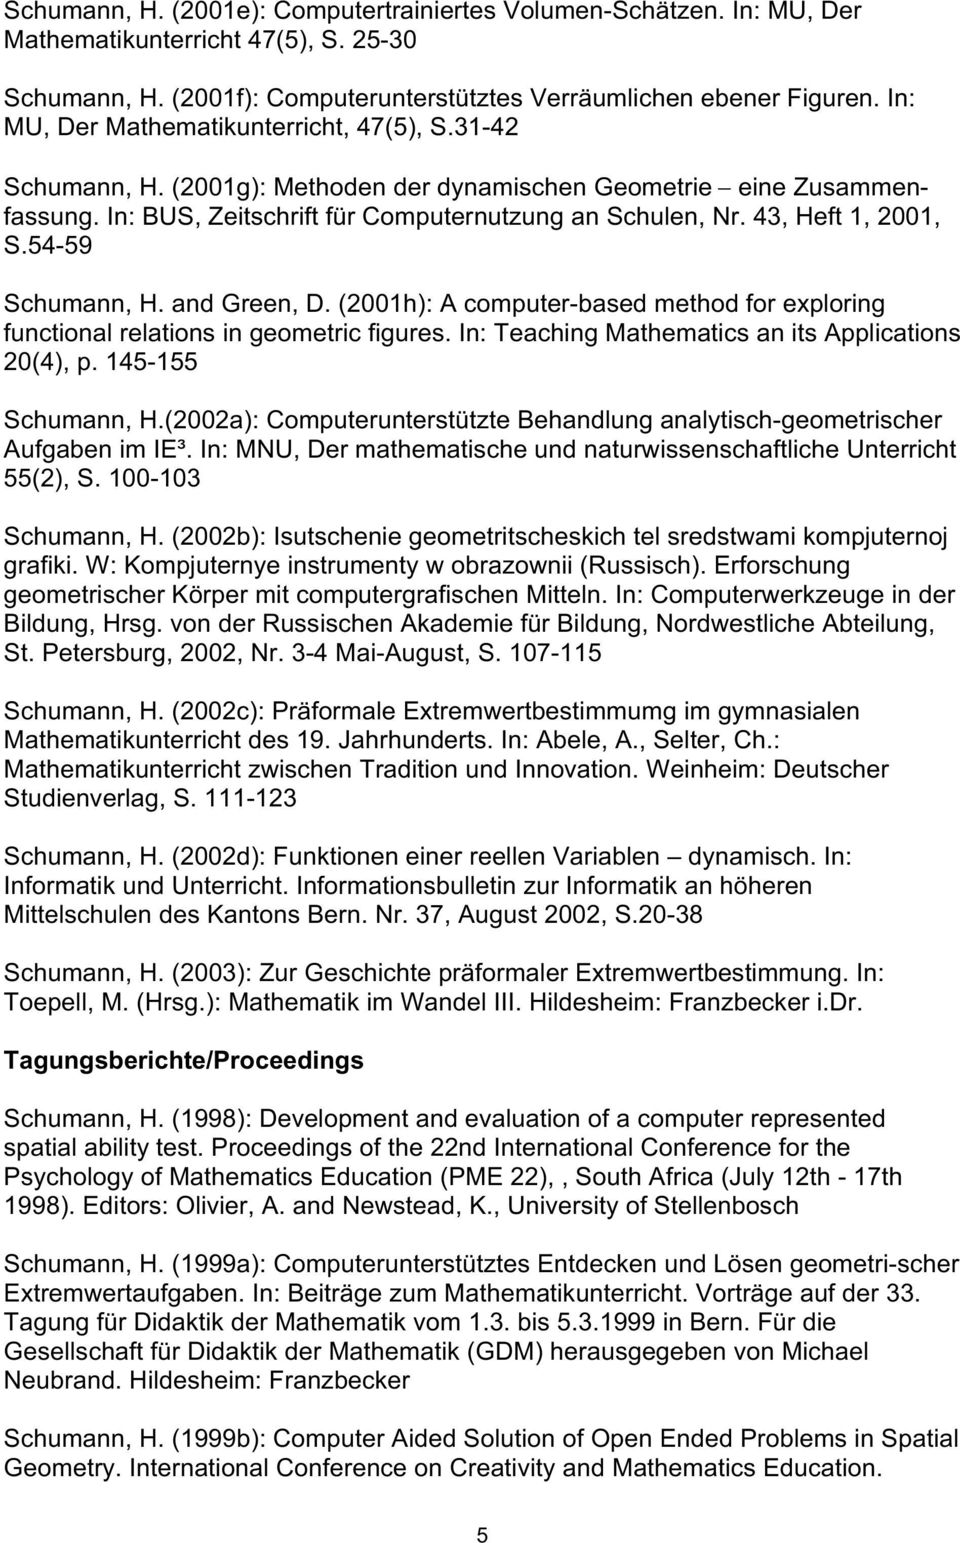 43, Heft 1, 2001, S.54-59 Schumann, H. and Green, D. (2001h): A computer-based method for exploring functional relations in geometric figures. In: Teaching Mathematics an its Applications 20(4), p.